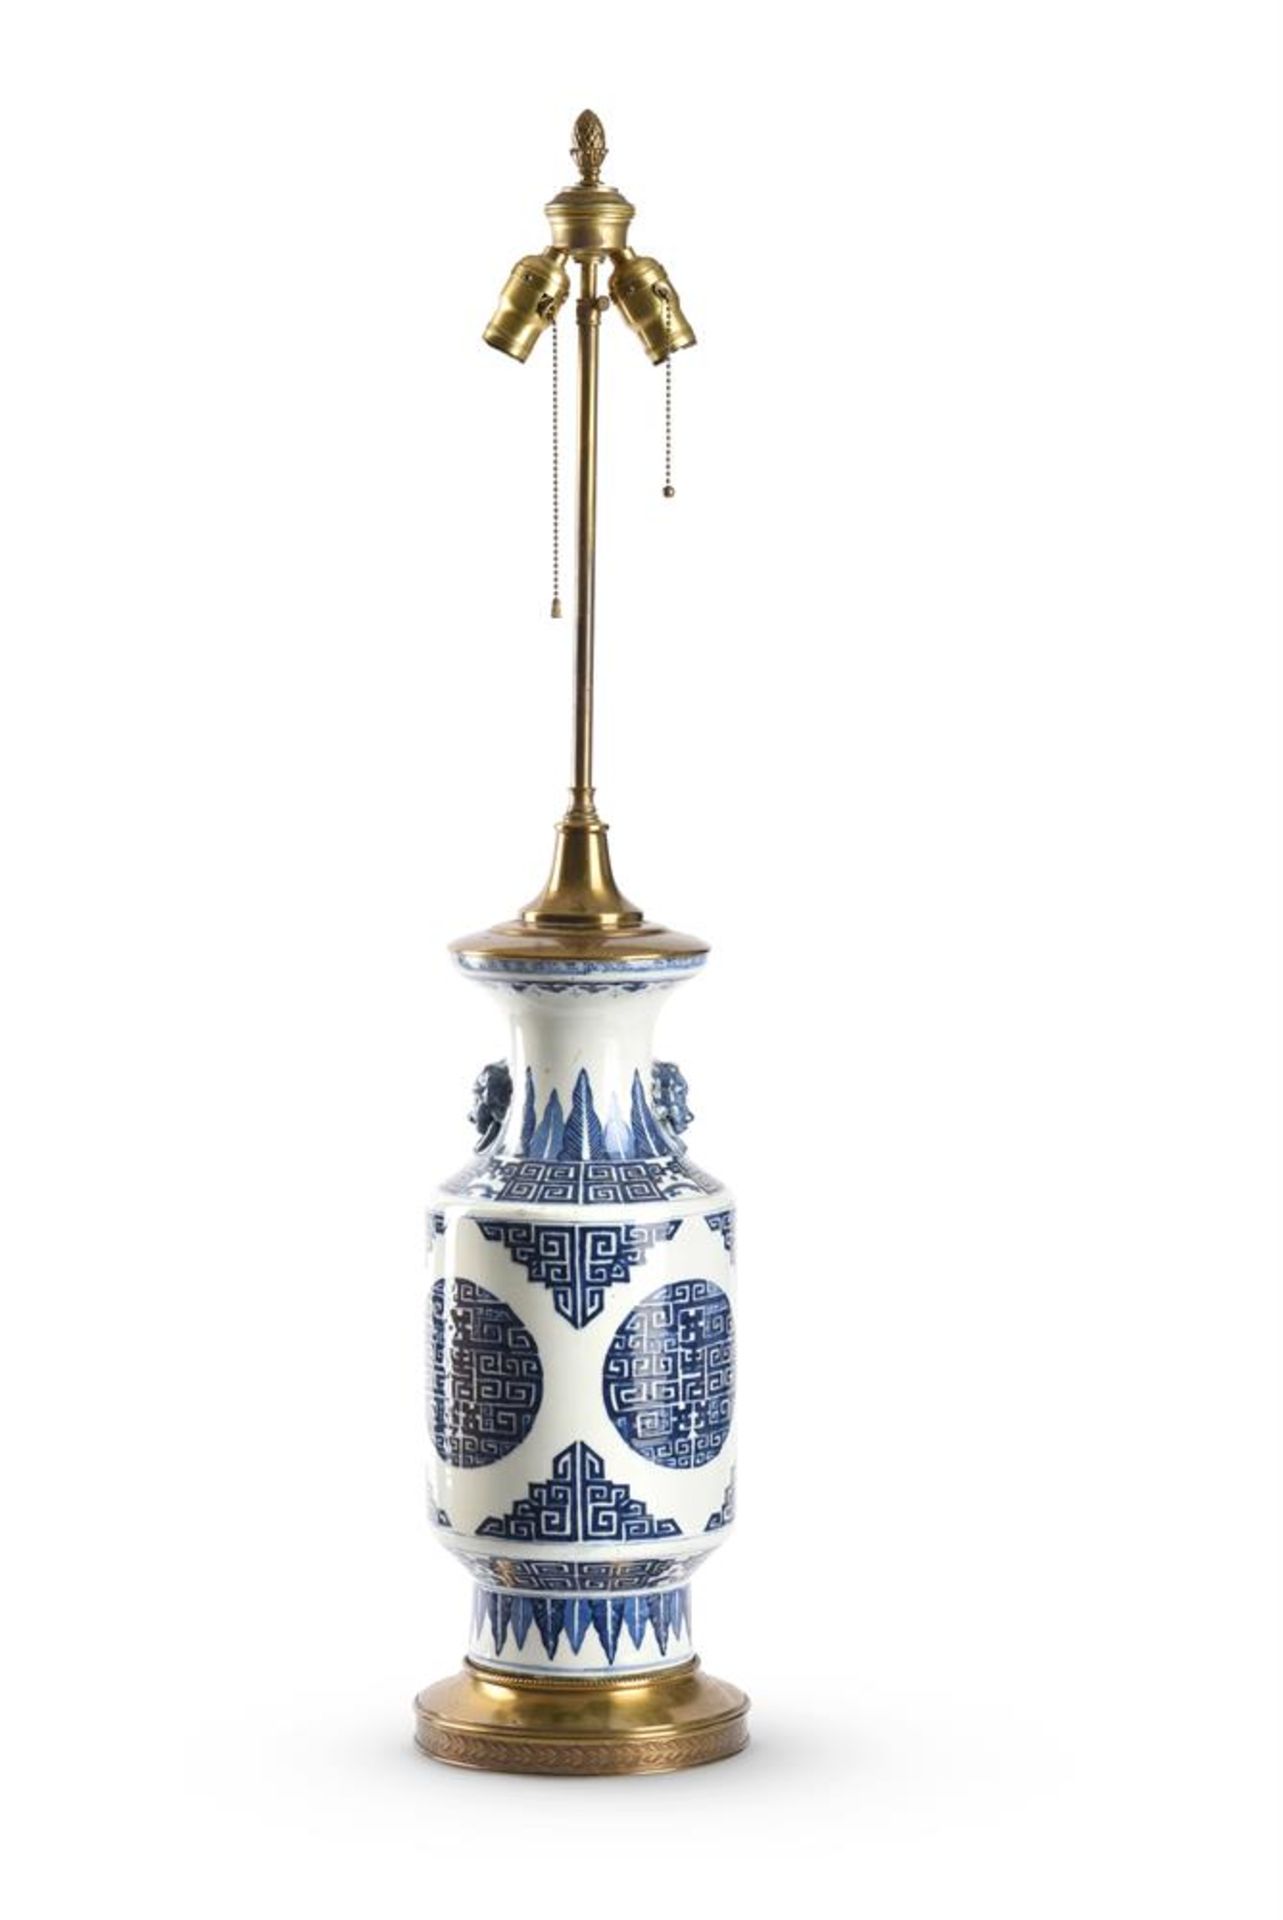 A CHINESE BLUE AND WHITE PORCELAIN AND GILT METAL MOUNTED TABLE LAMP, LATE 19TH OR 20TH CENTURY - Image 2 of 4